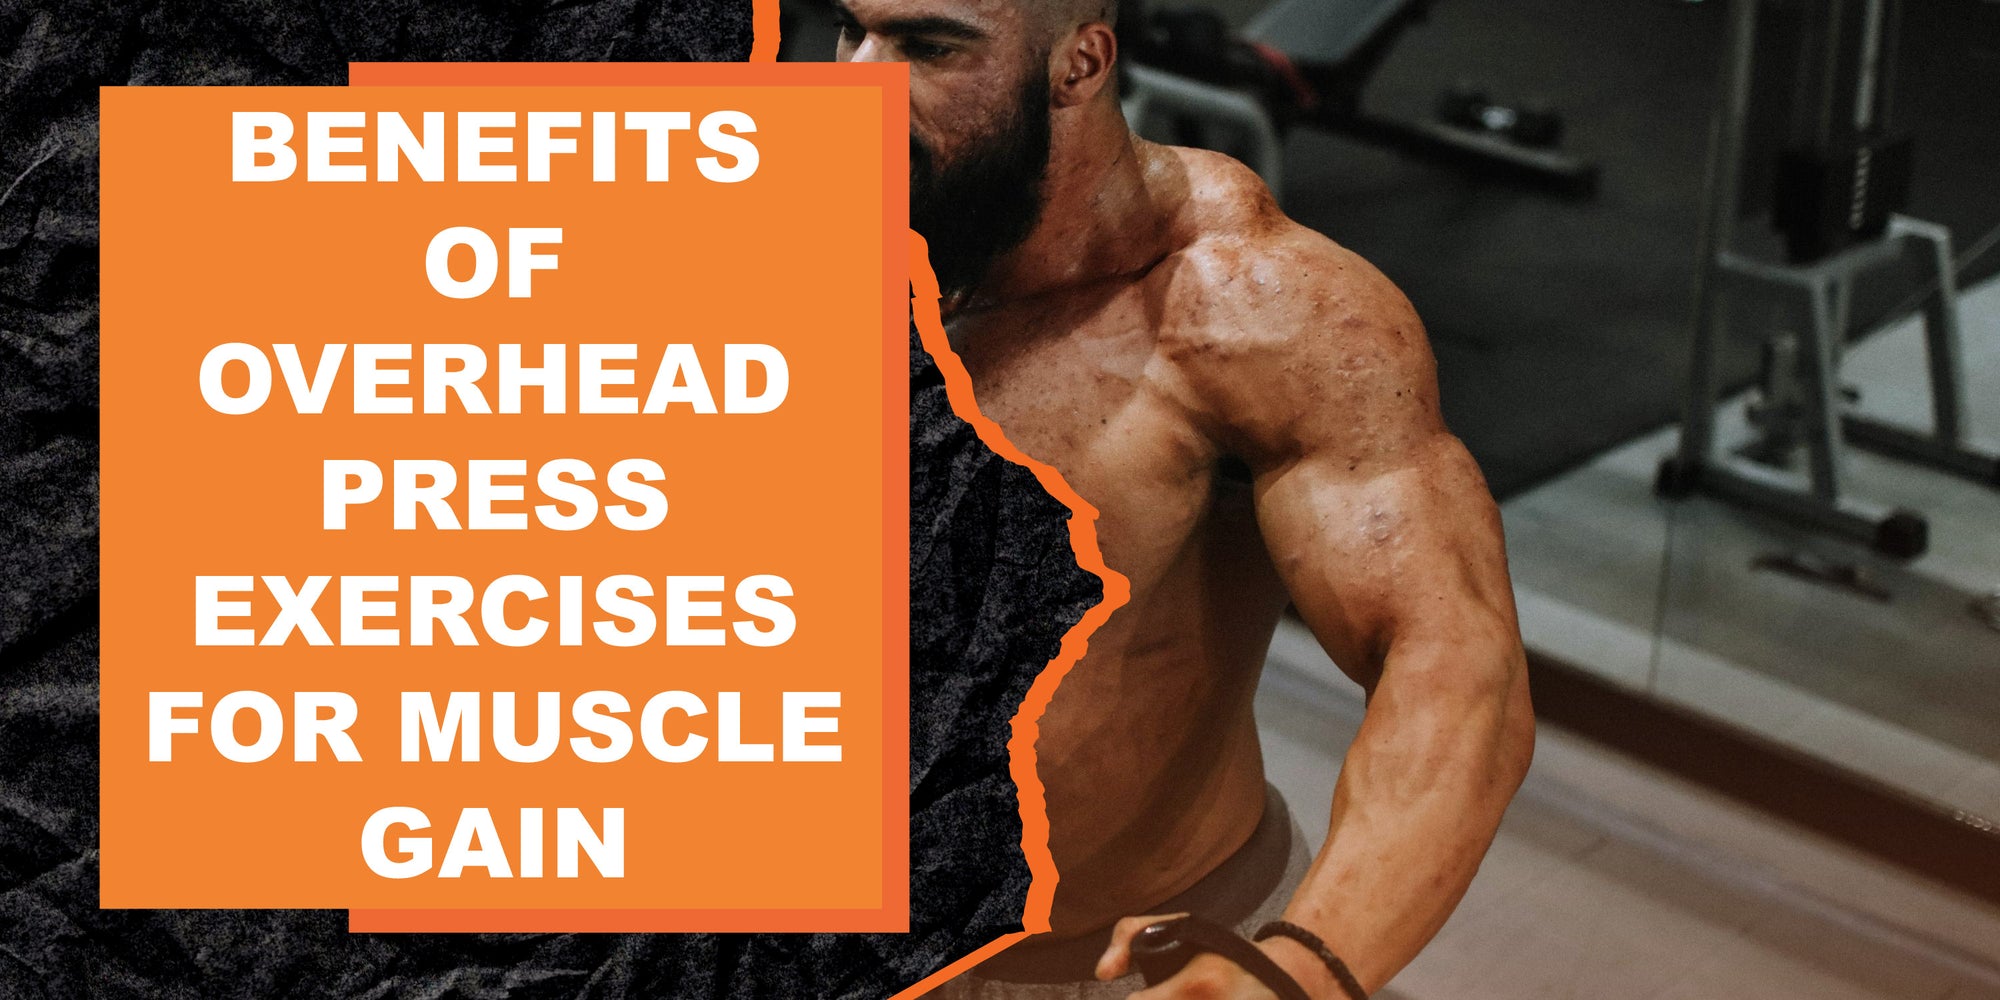 The Benefits of Overhead Press Exercises for Strength and Muscle Gain